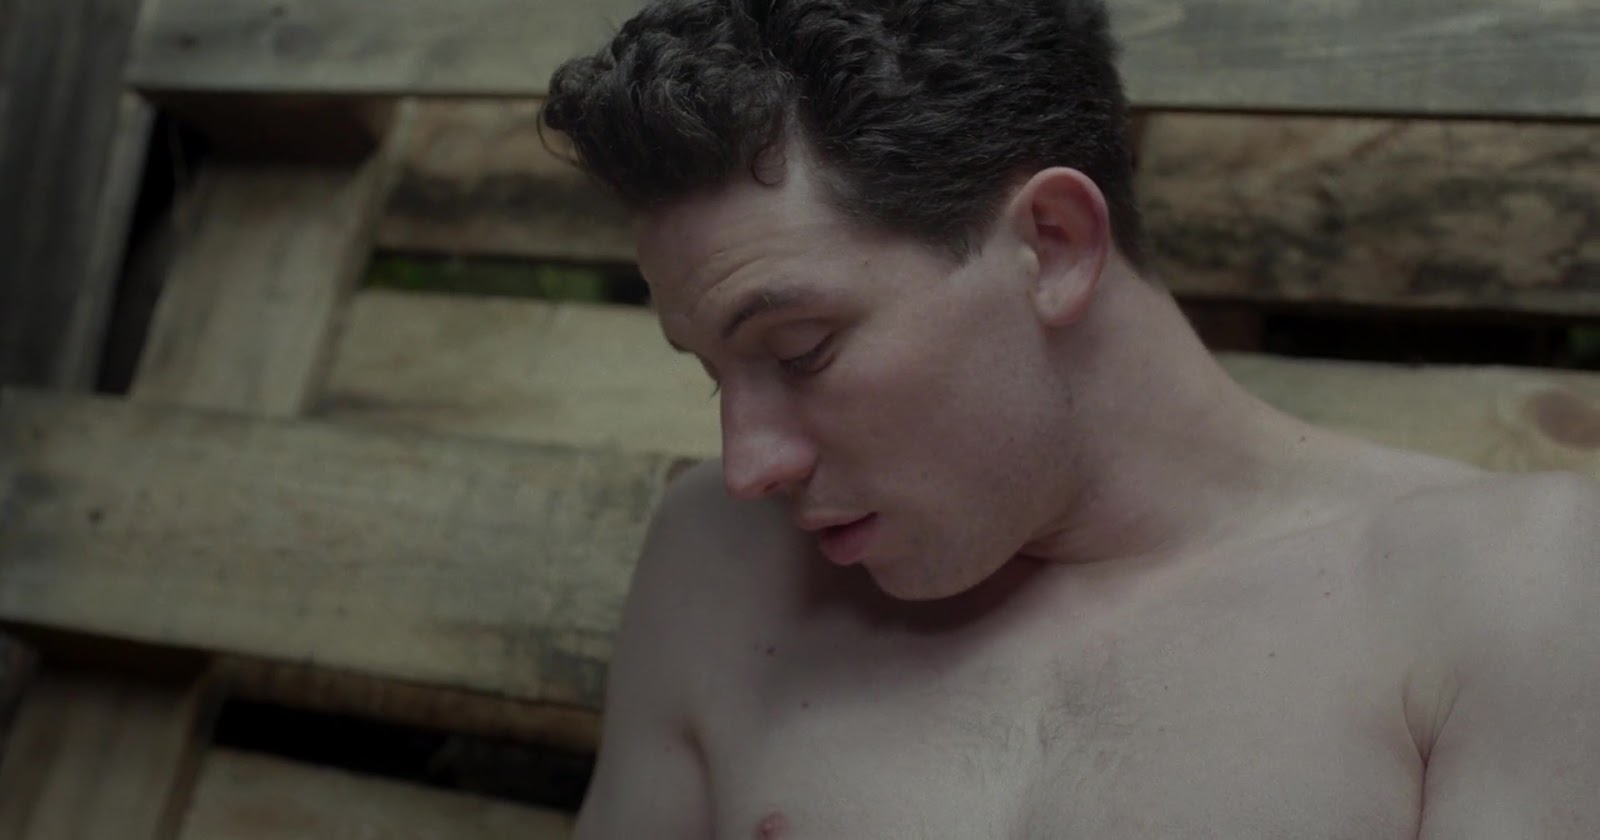 Josh O'Connor and Alec Secareanu nude in God's Own Country.